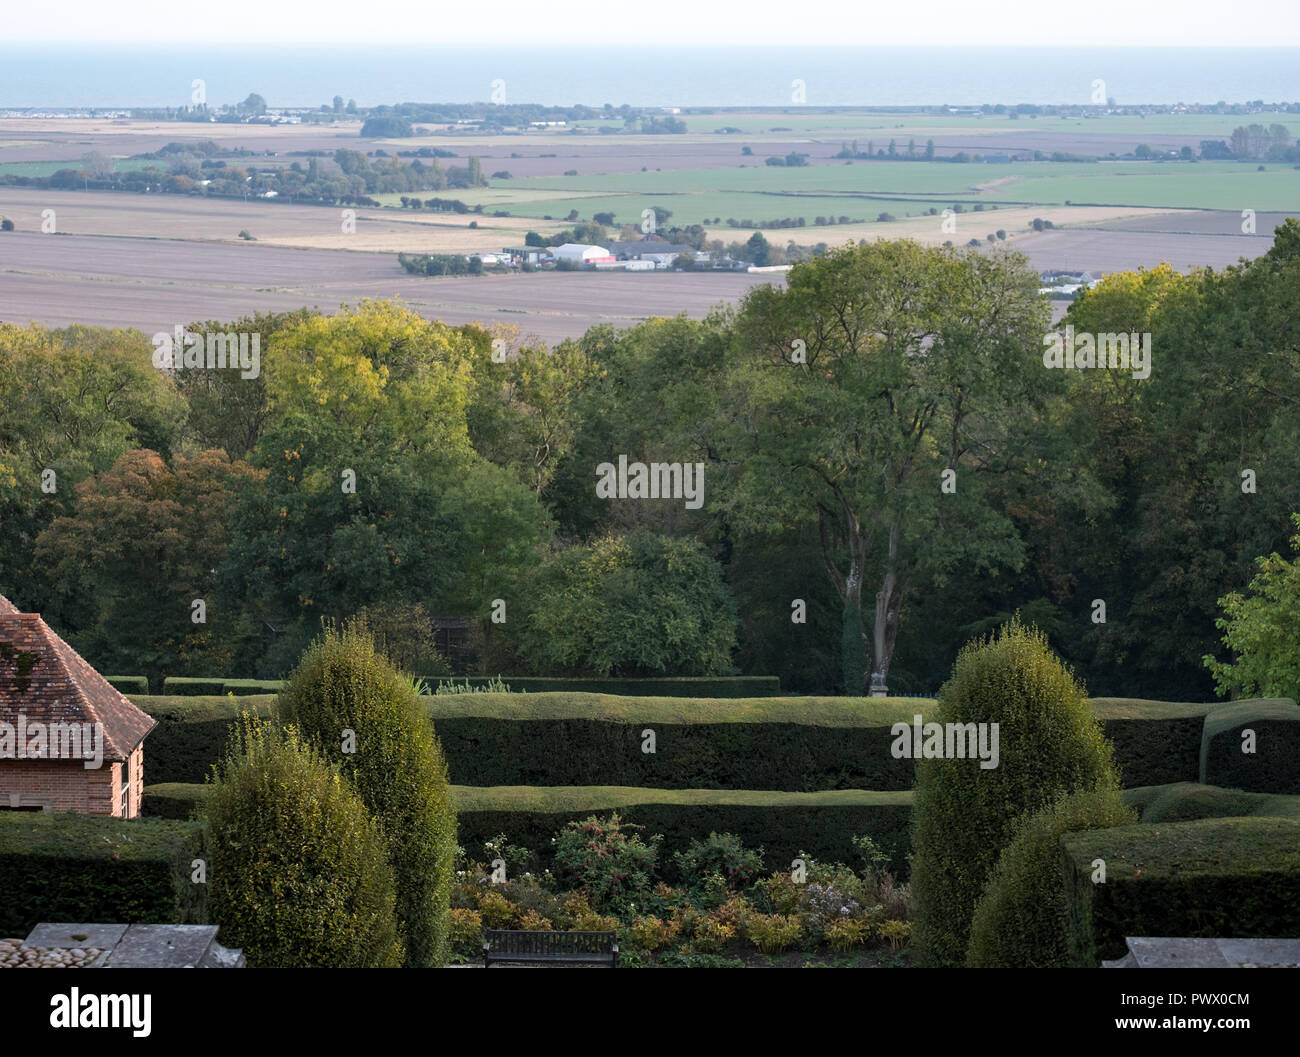 View of the South Downs with the sea on the horizon, photographed from the gardens at Port Lympne Wildlife Park near Ashford, Kent UK. Stock Photo